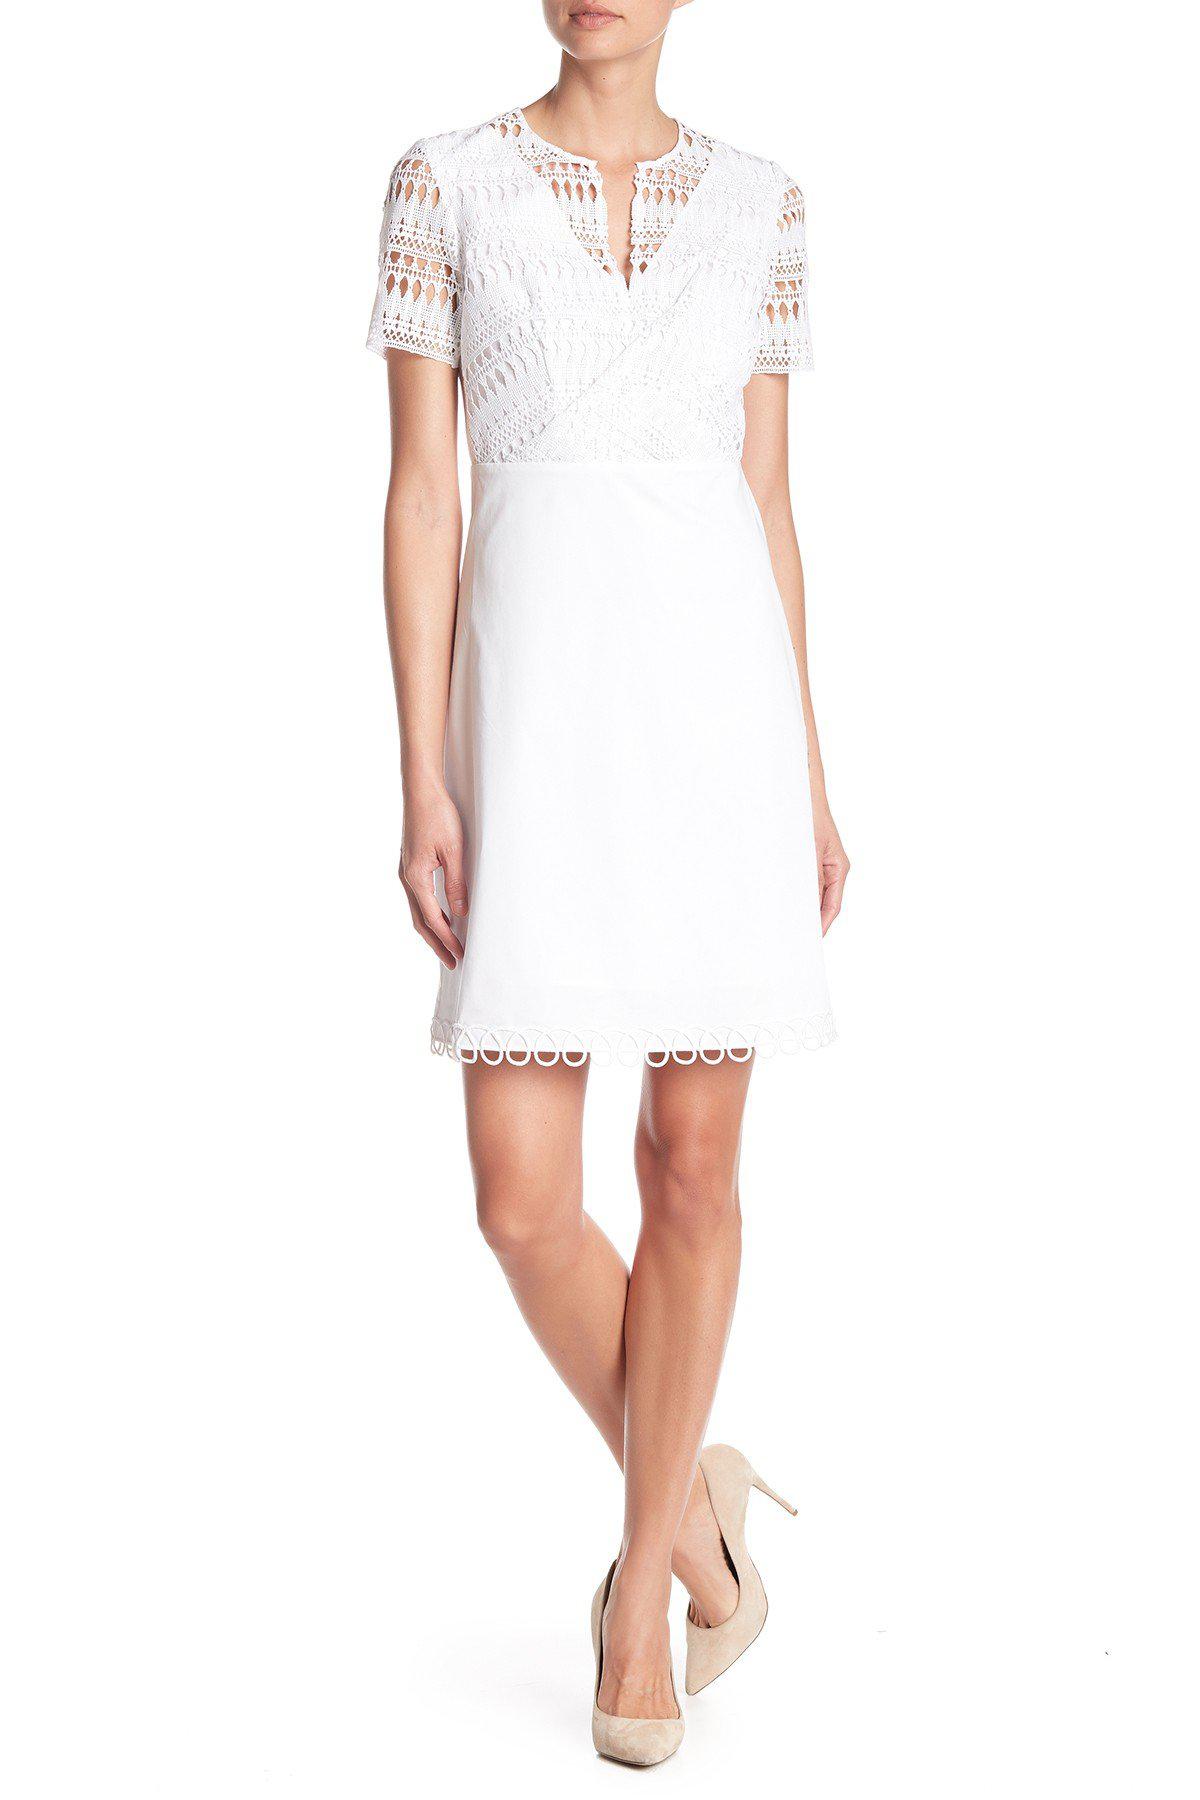 Lyst - Elie Tahari E303n607 Lace V-neck A-line Dress in White